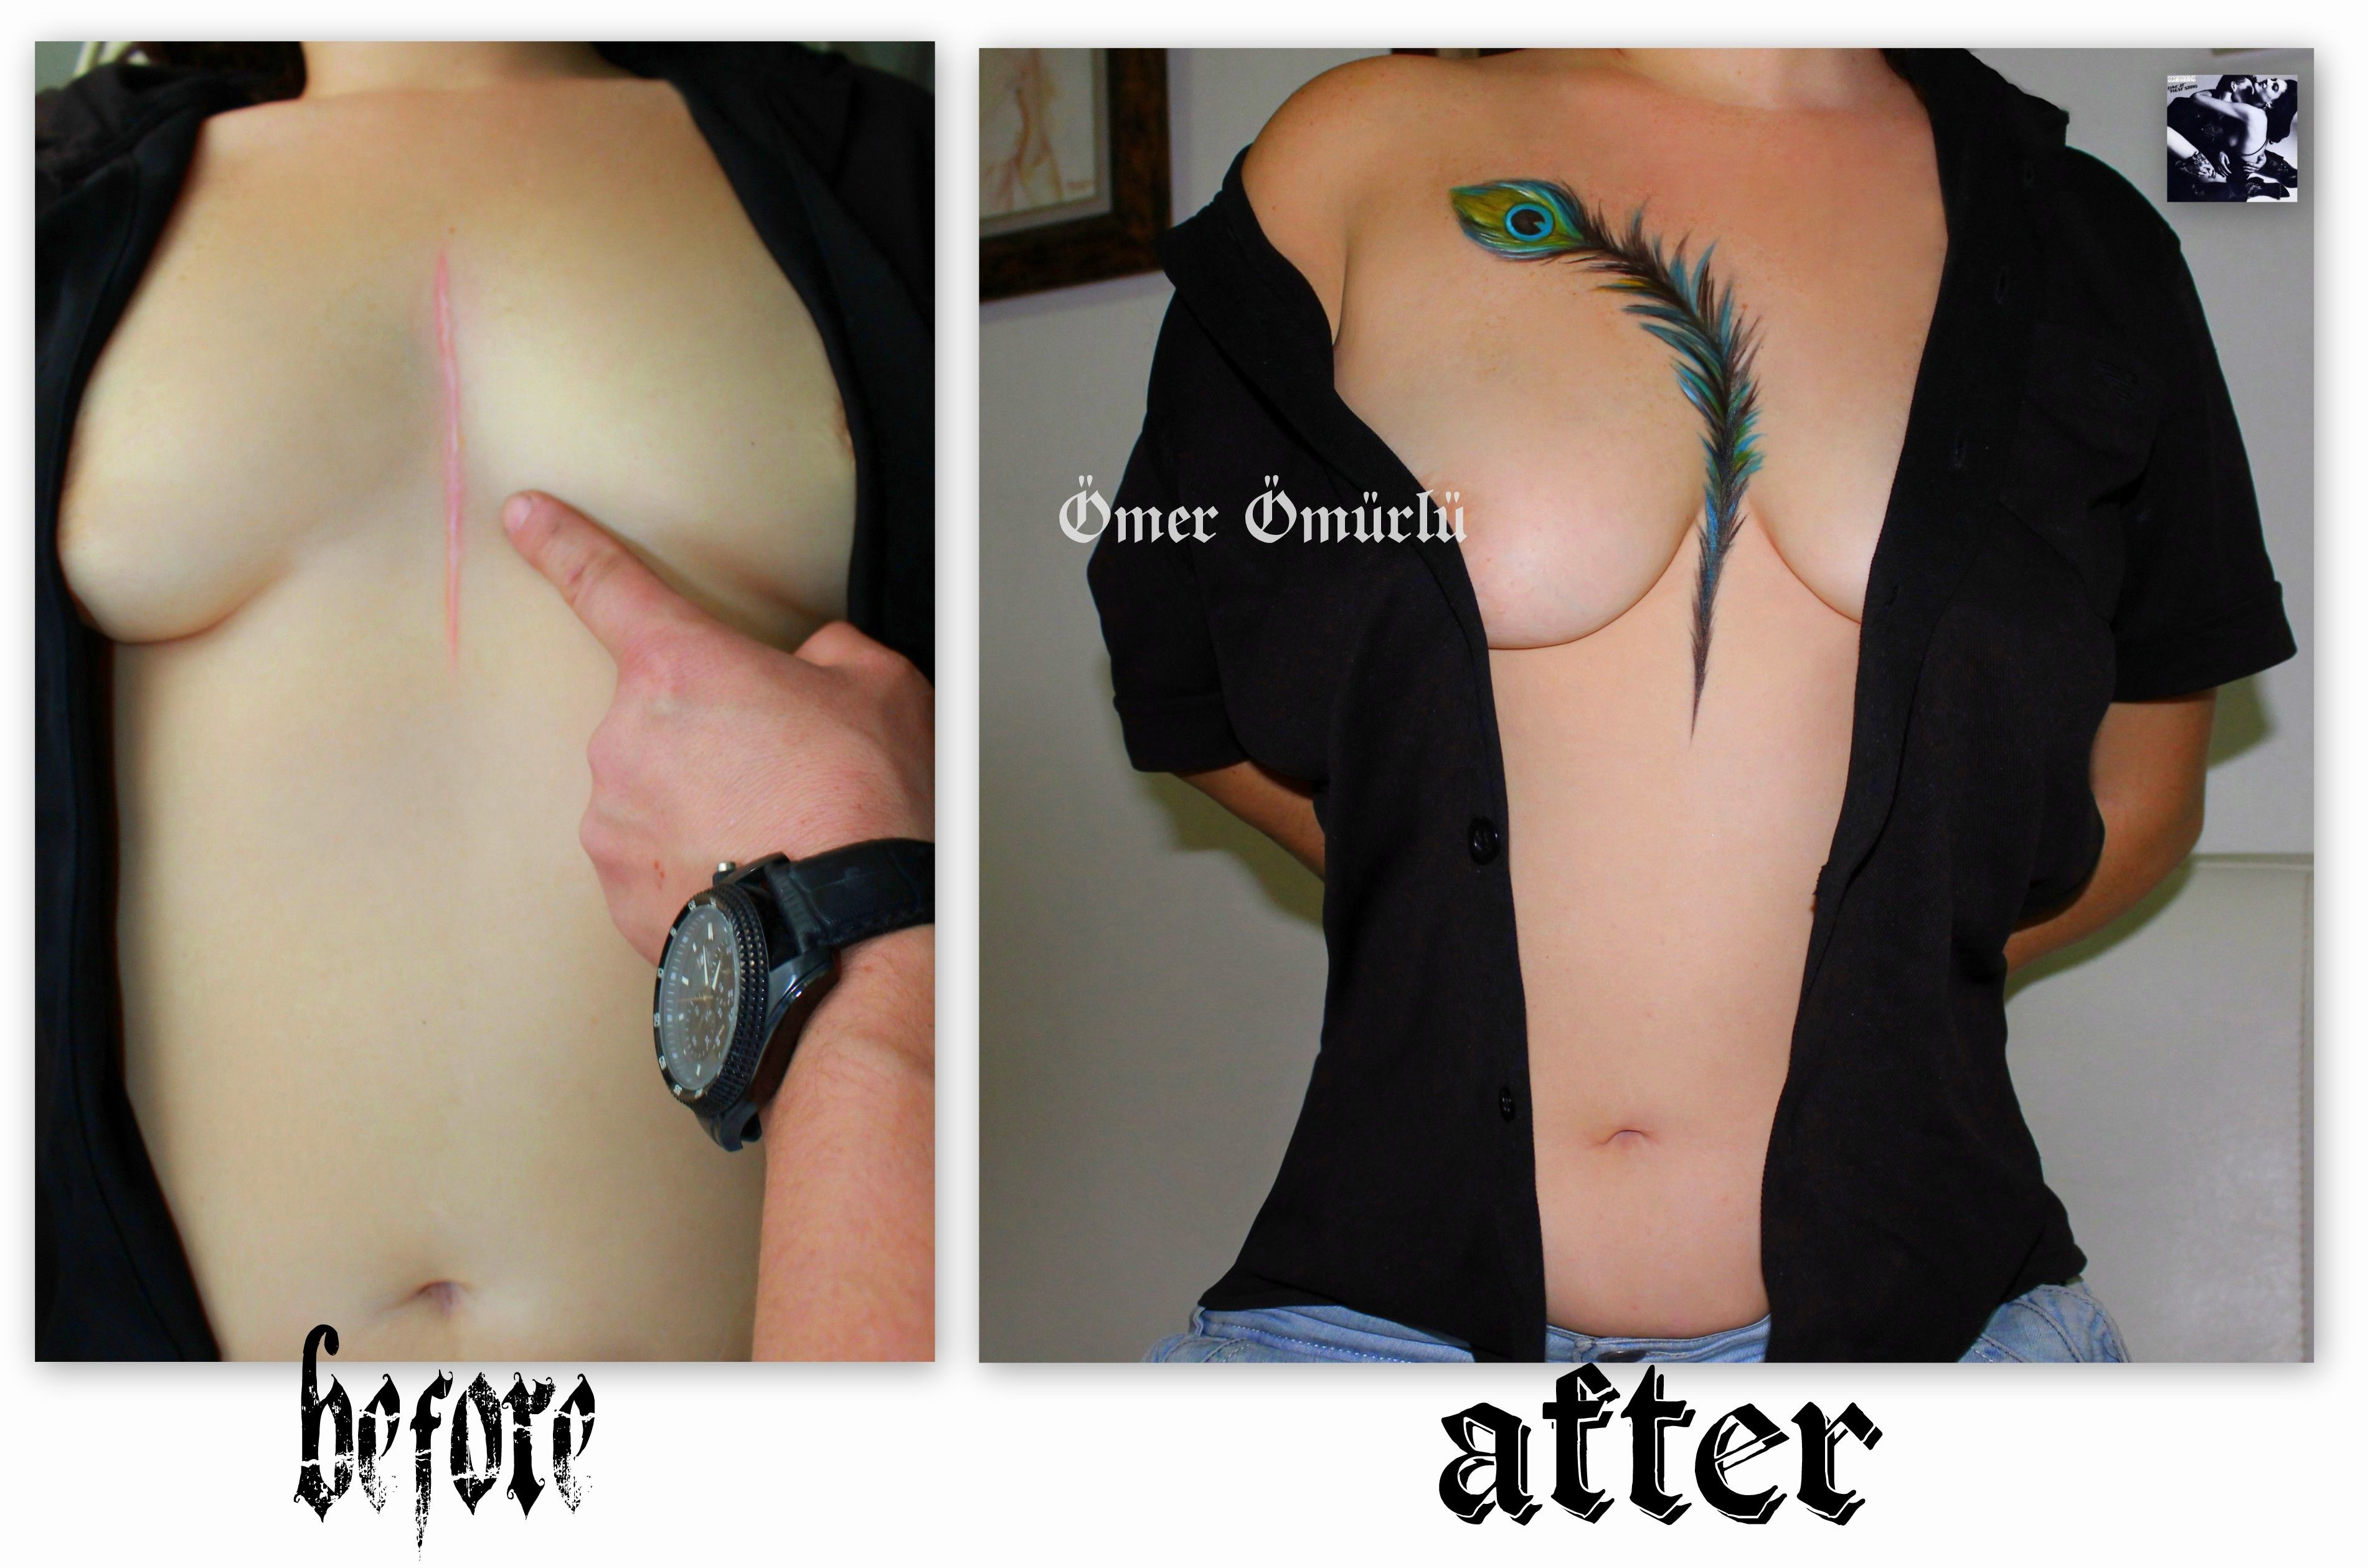 Covering A Heart Surgery Scar With Feather Tattootattoo Mer pertaining to dimensions 3803 X 2518